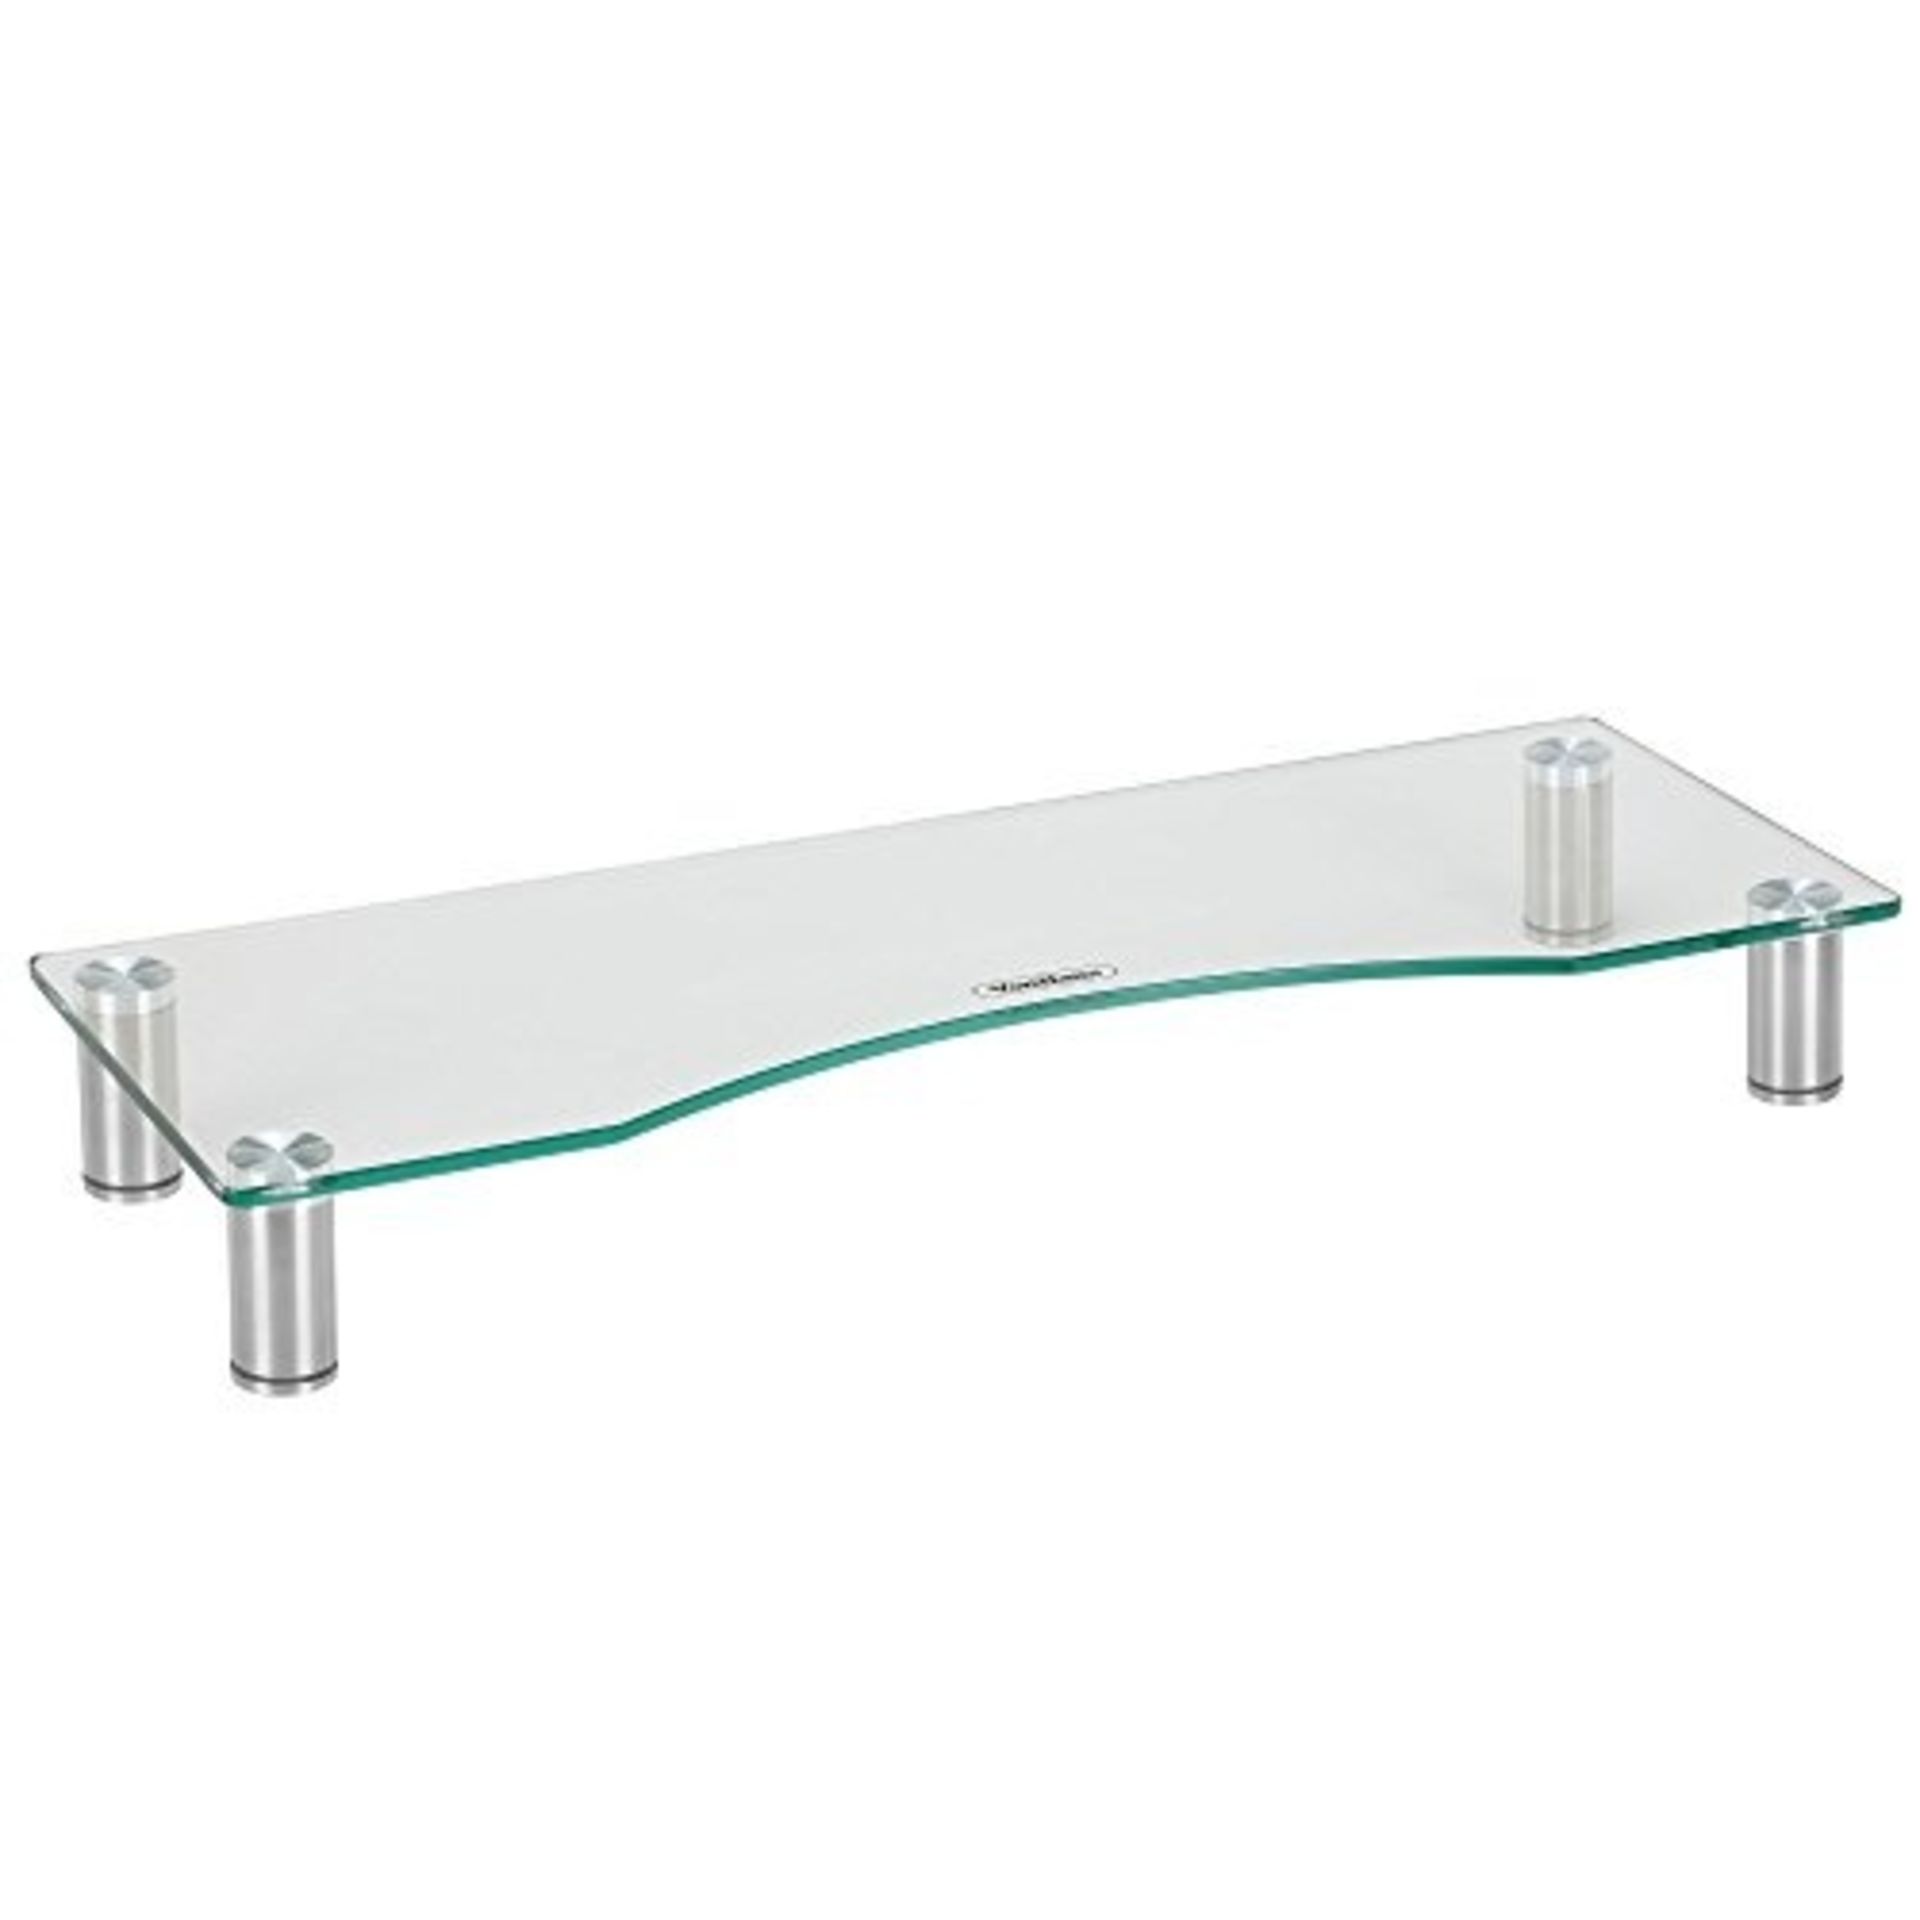 Large Glass Monitor Stand - ER35